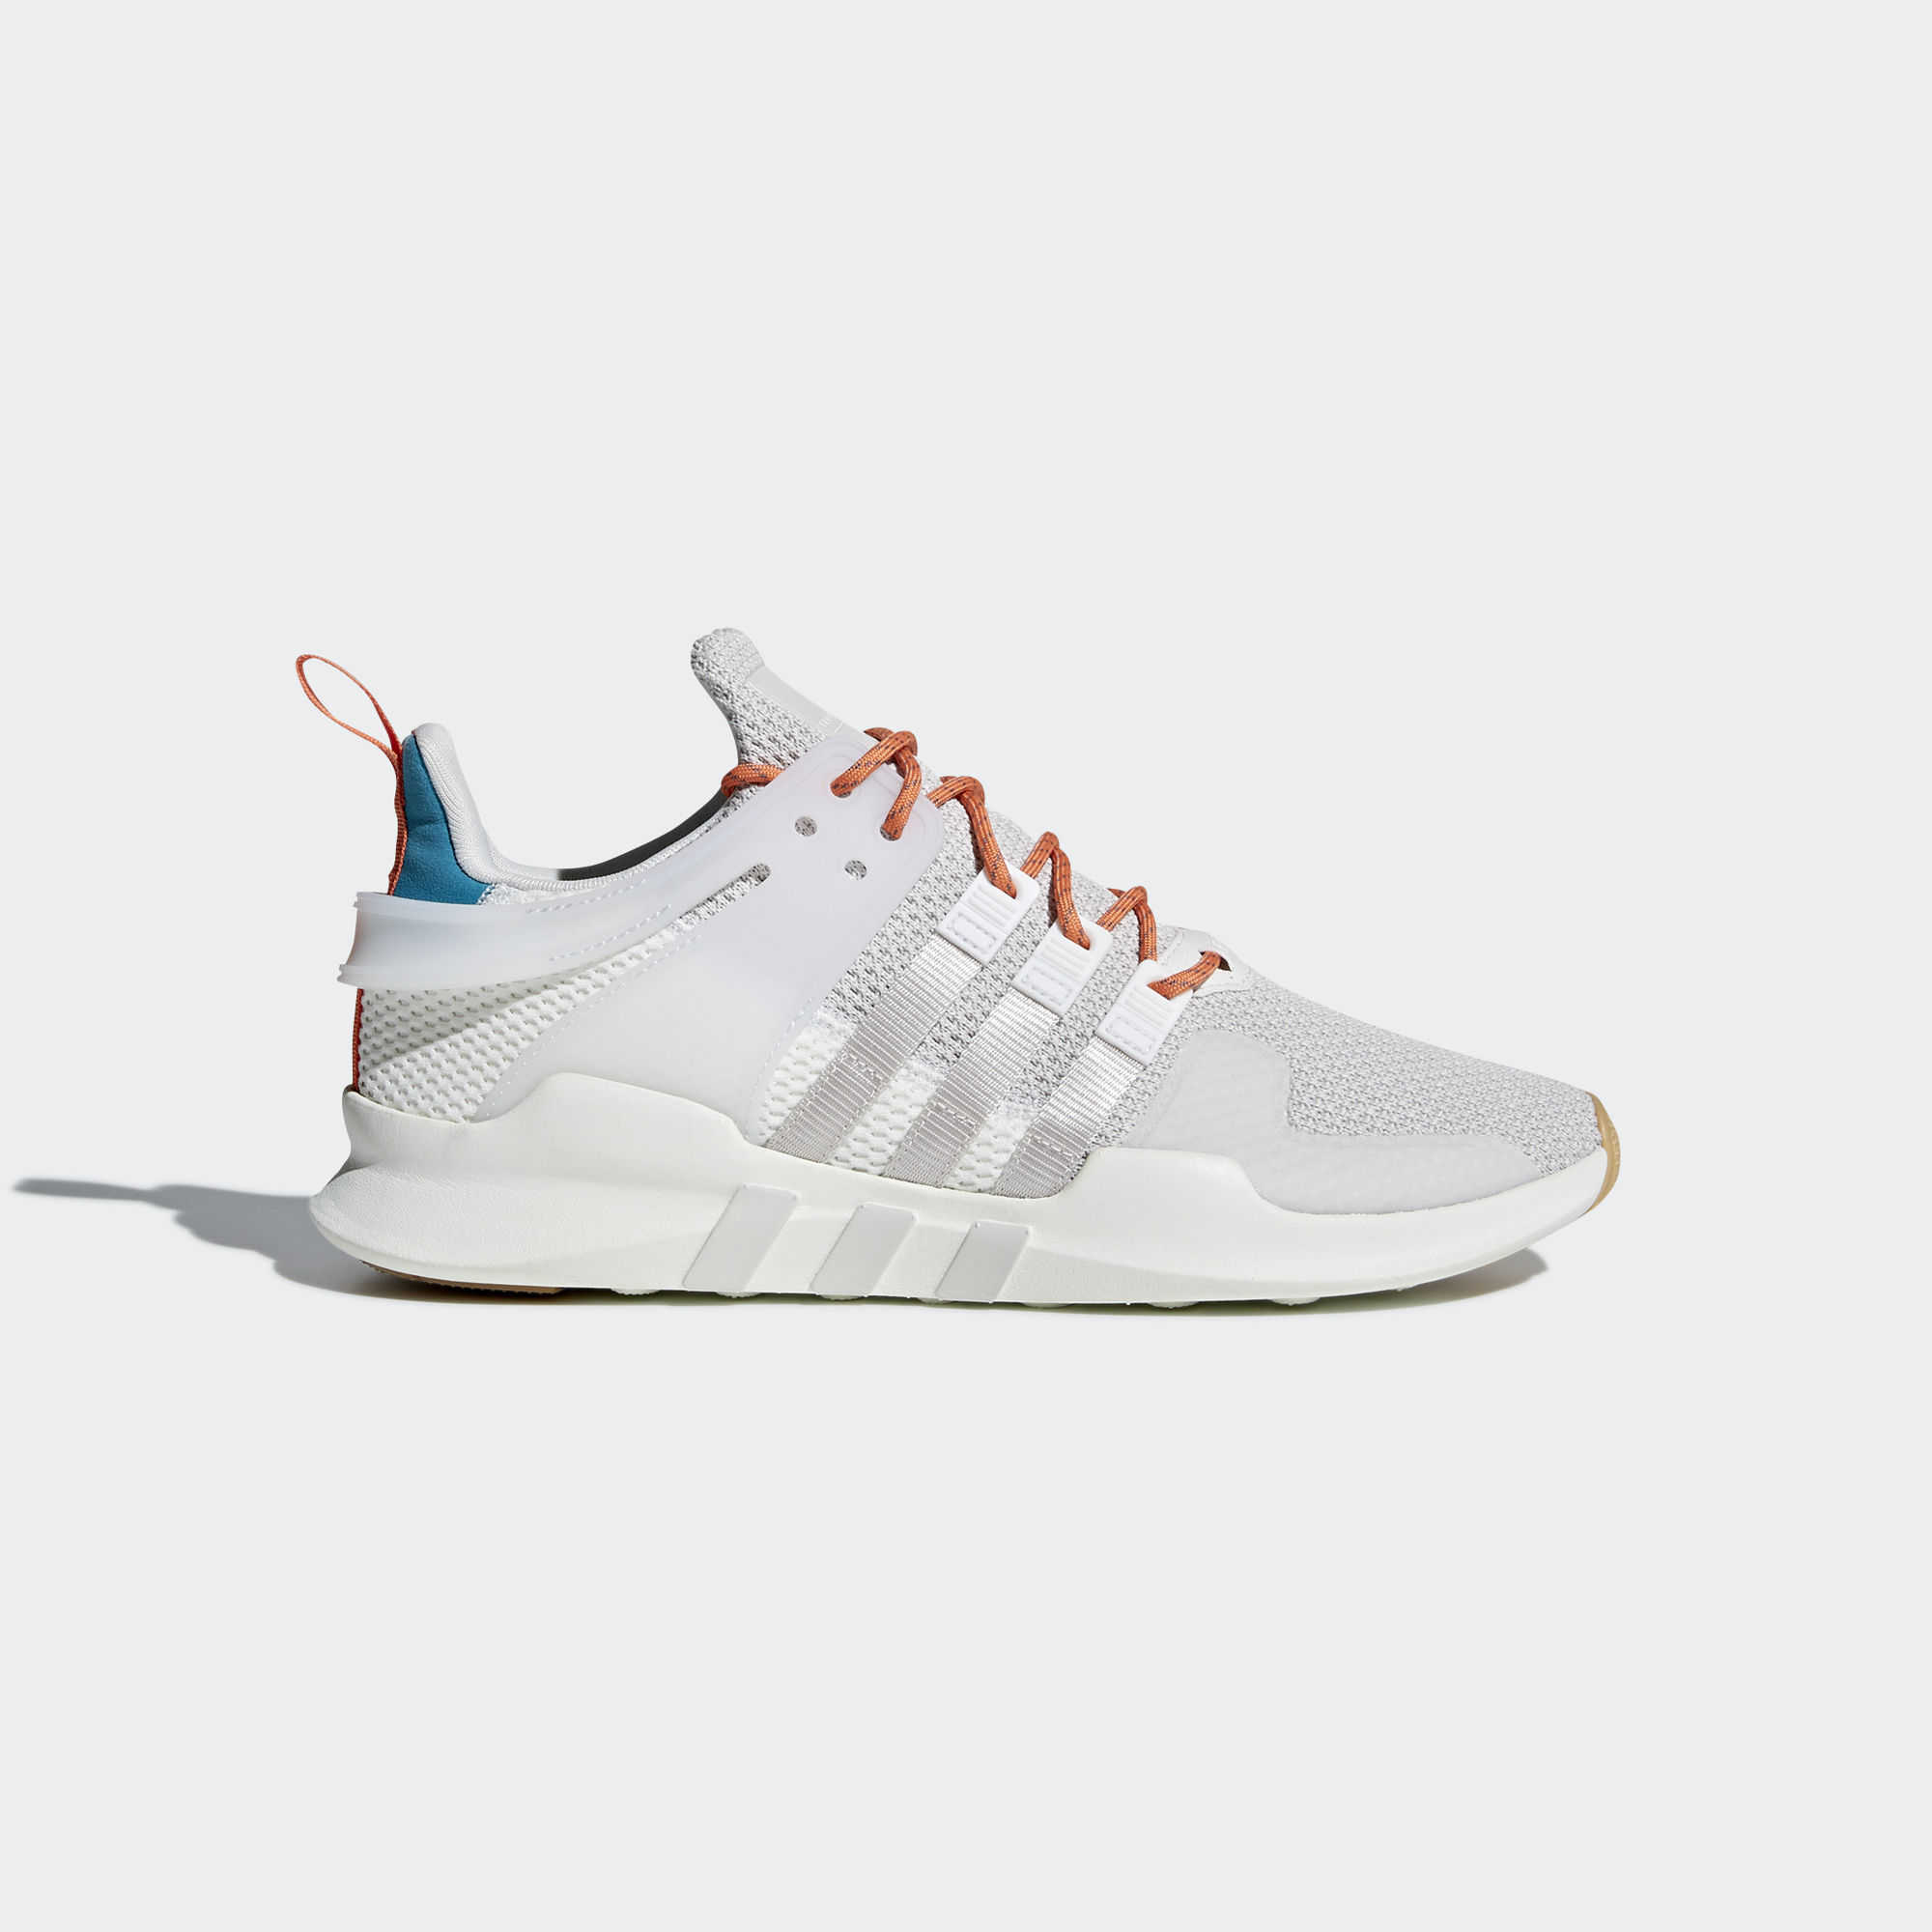 eqt support adv summer shoes